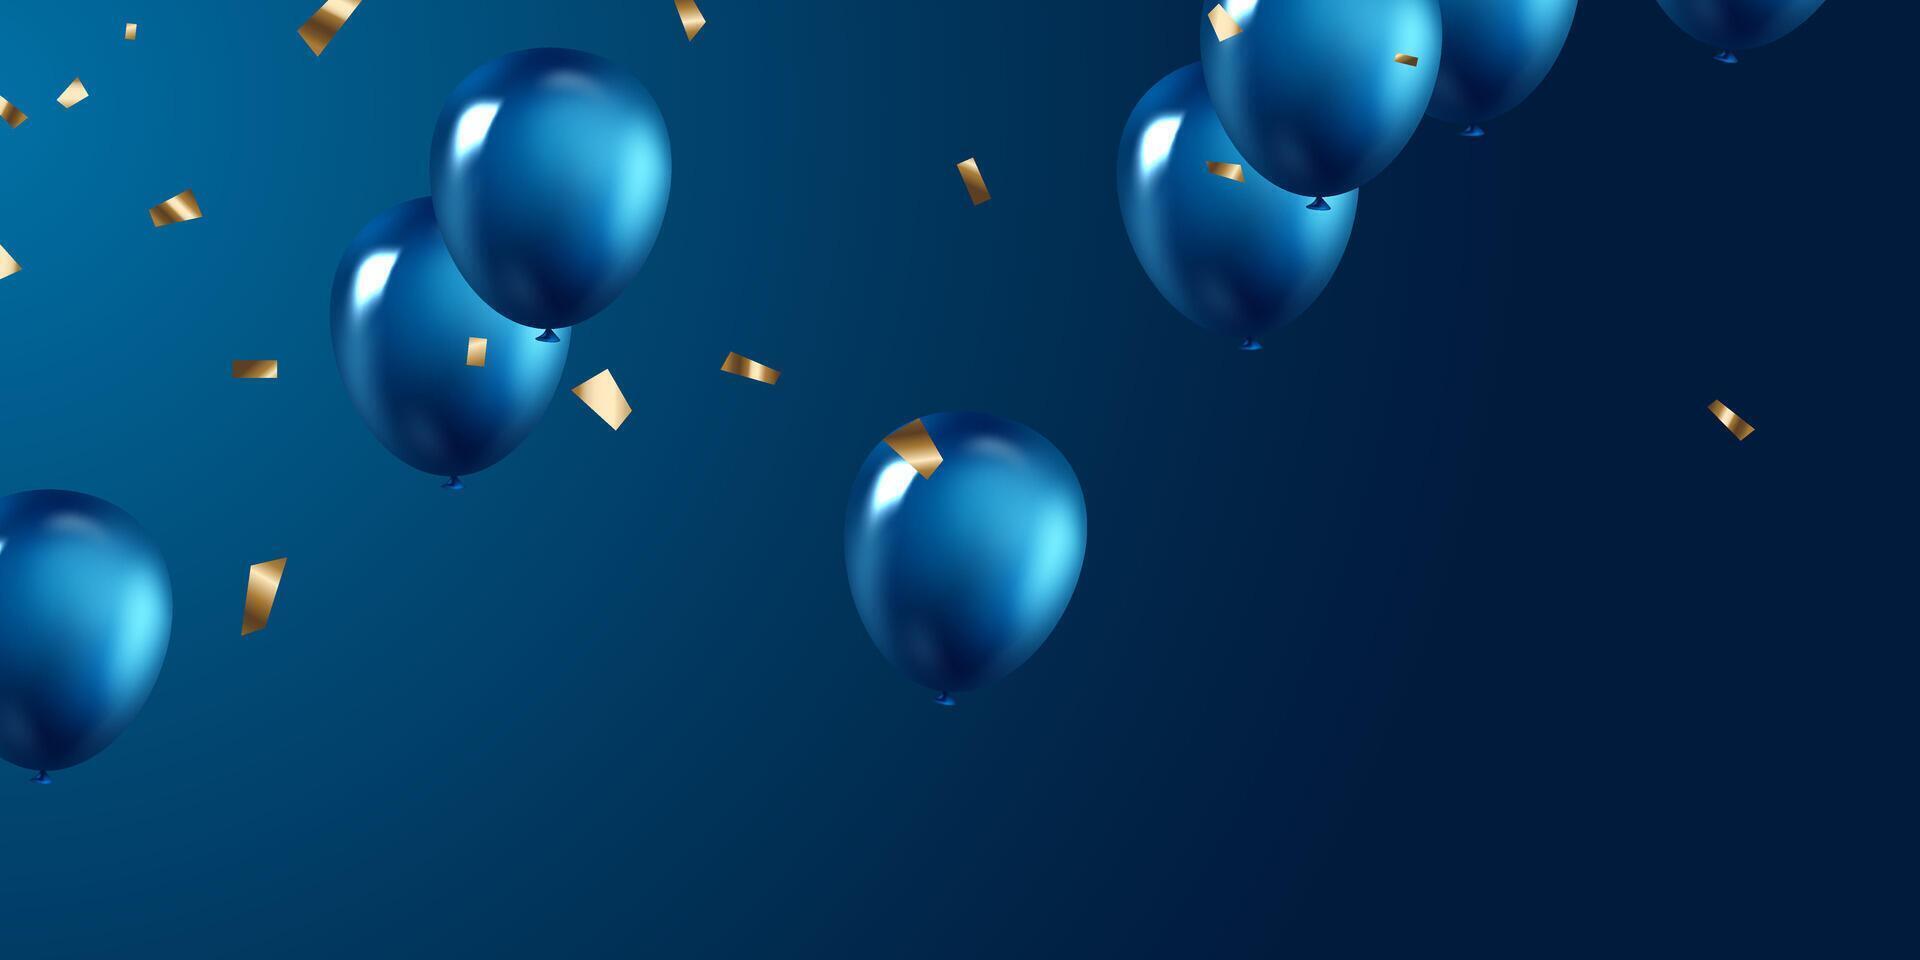 Celebration background with beautifully arranged blue balloons. 3DVector illustration design vector